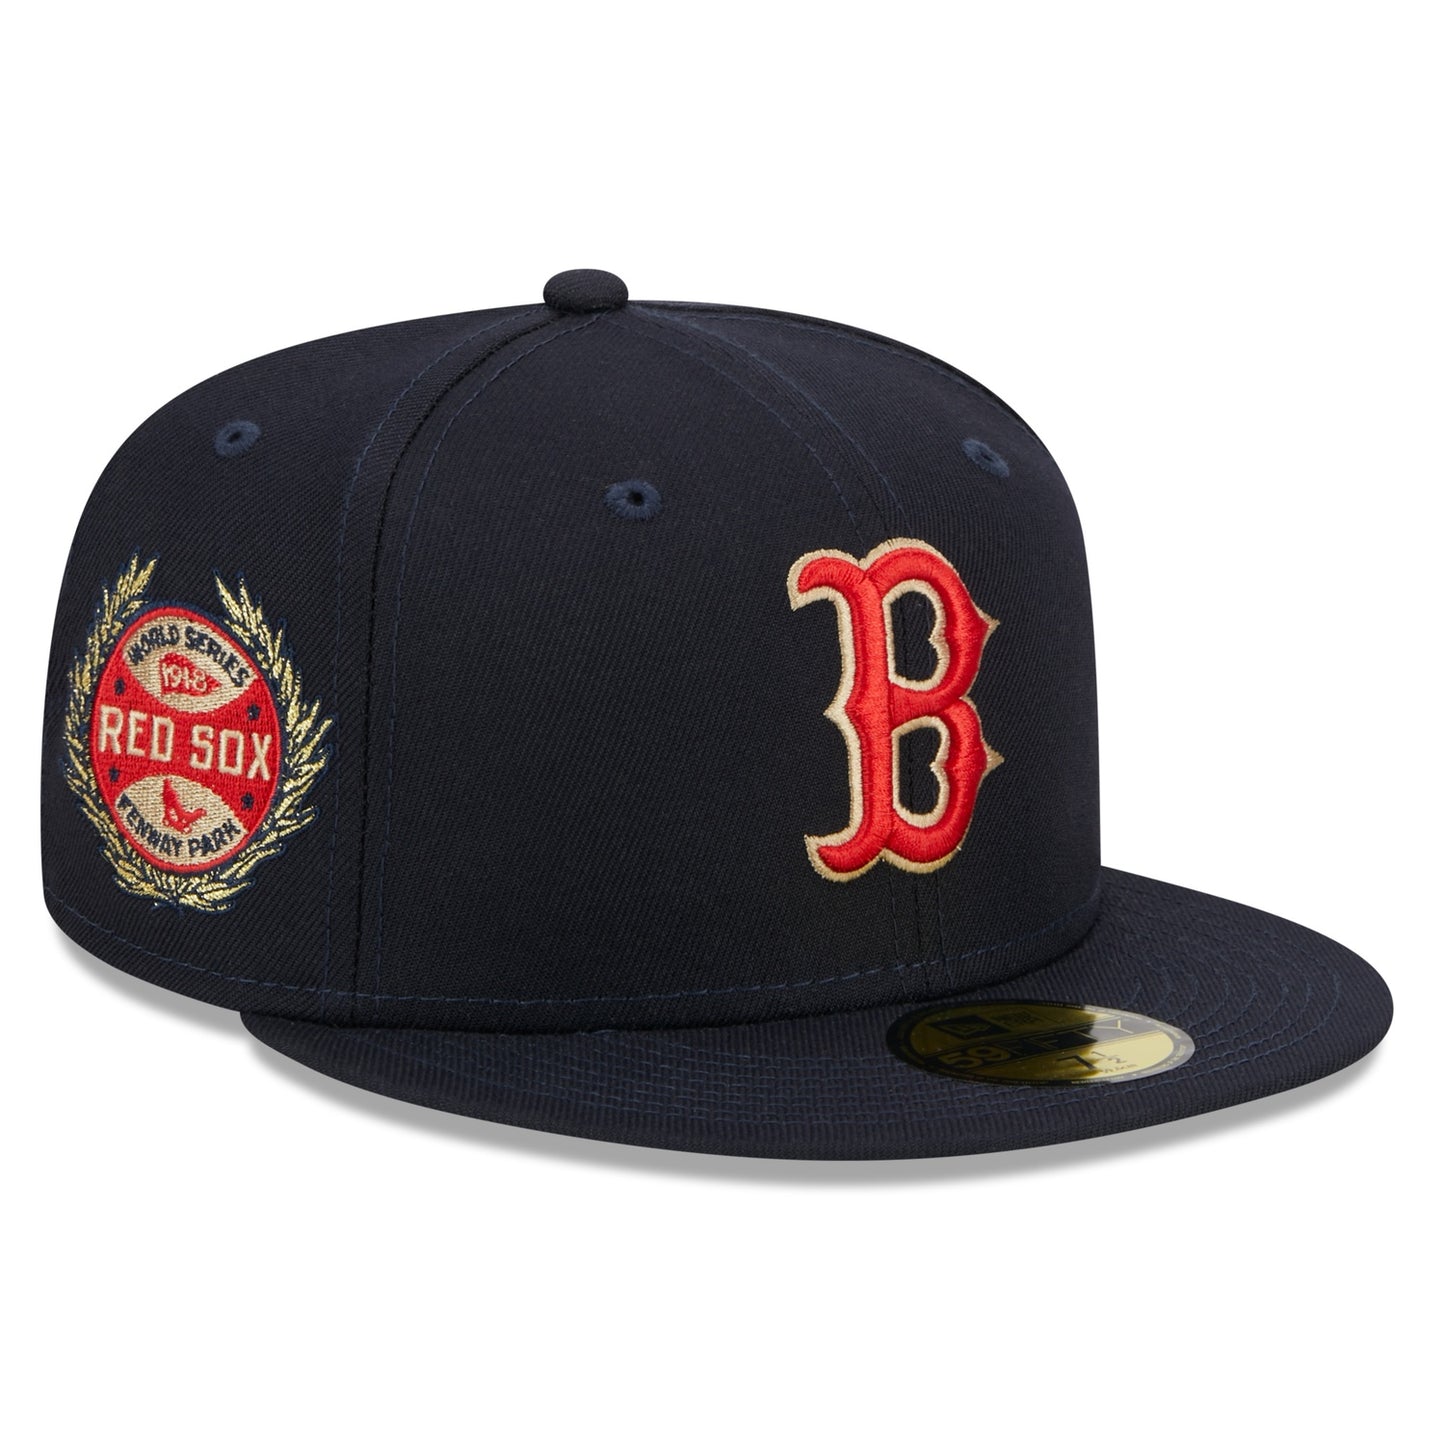 NEW ERA 59FIFTY MLB BOSTON RED SOX WORLD SERIES 1918 NAVY / GREEN UV FITTED CAP